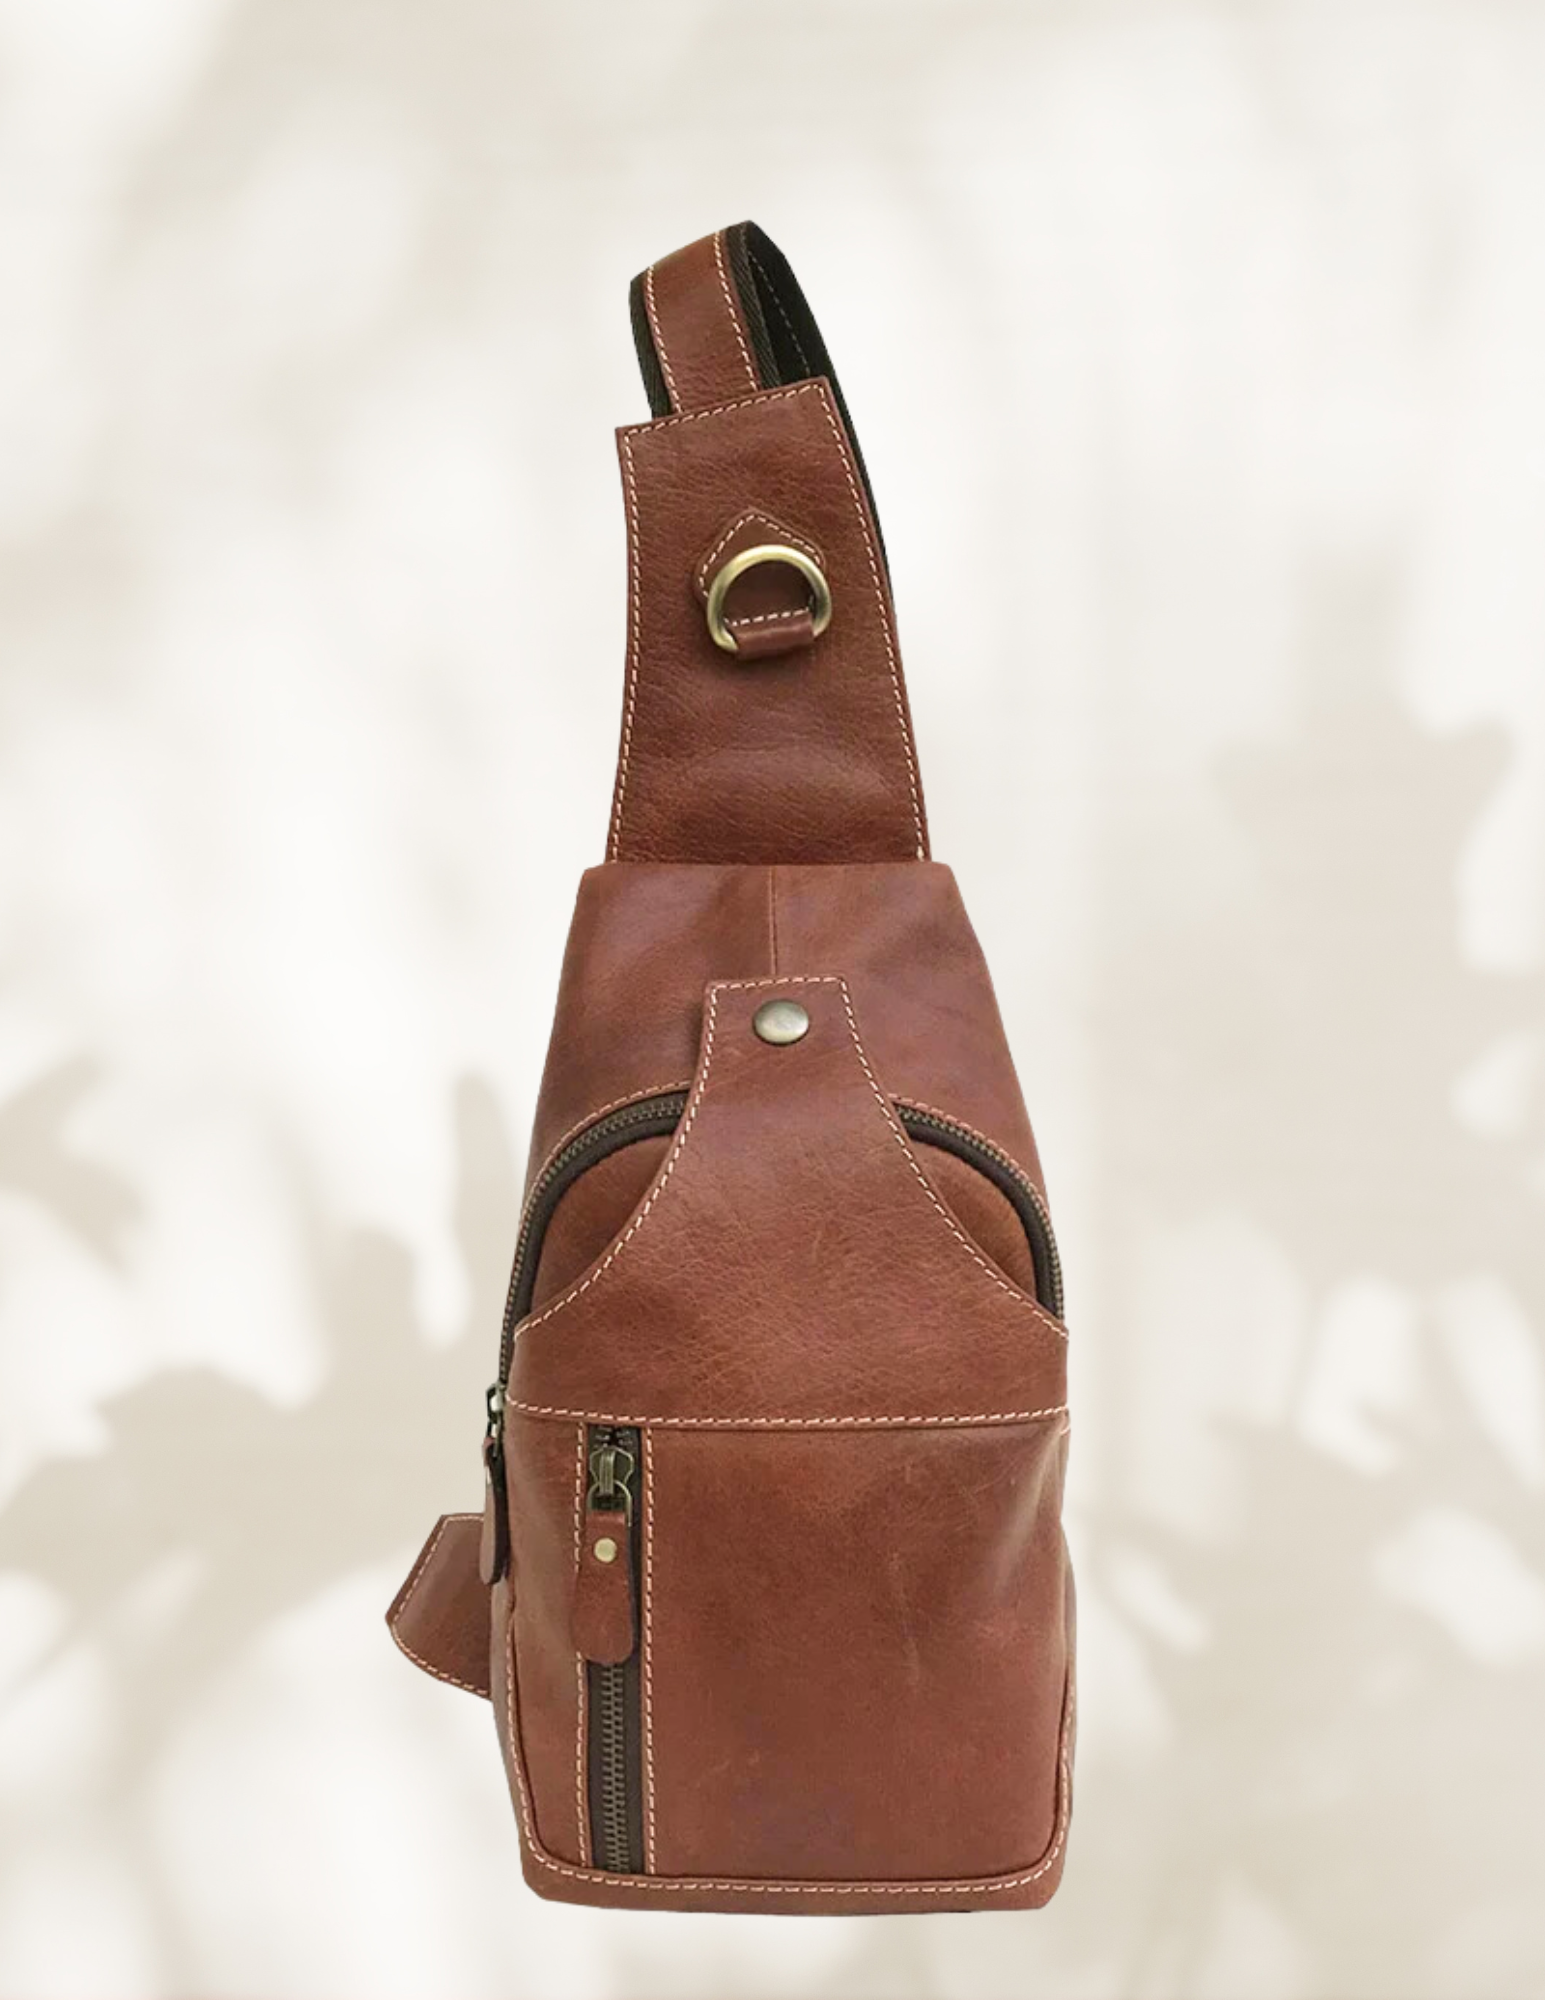 Modern Leather Chest Bag - Cognac Brown-Status Co. Leather Studio